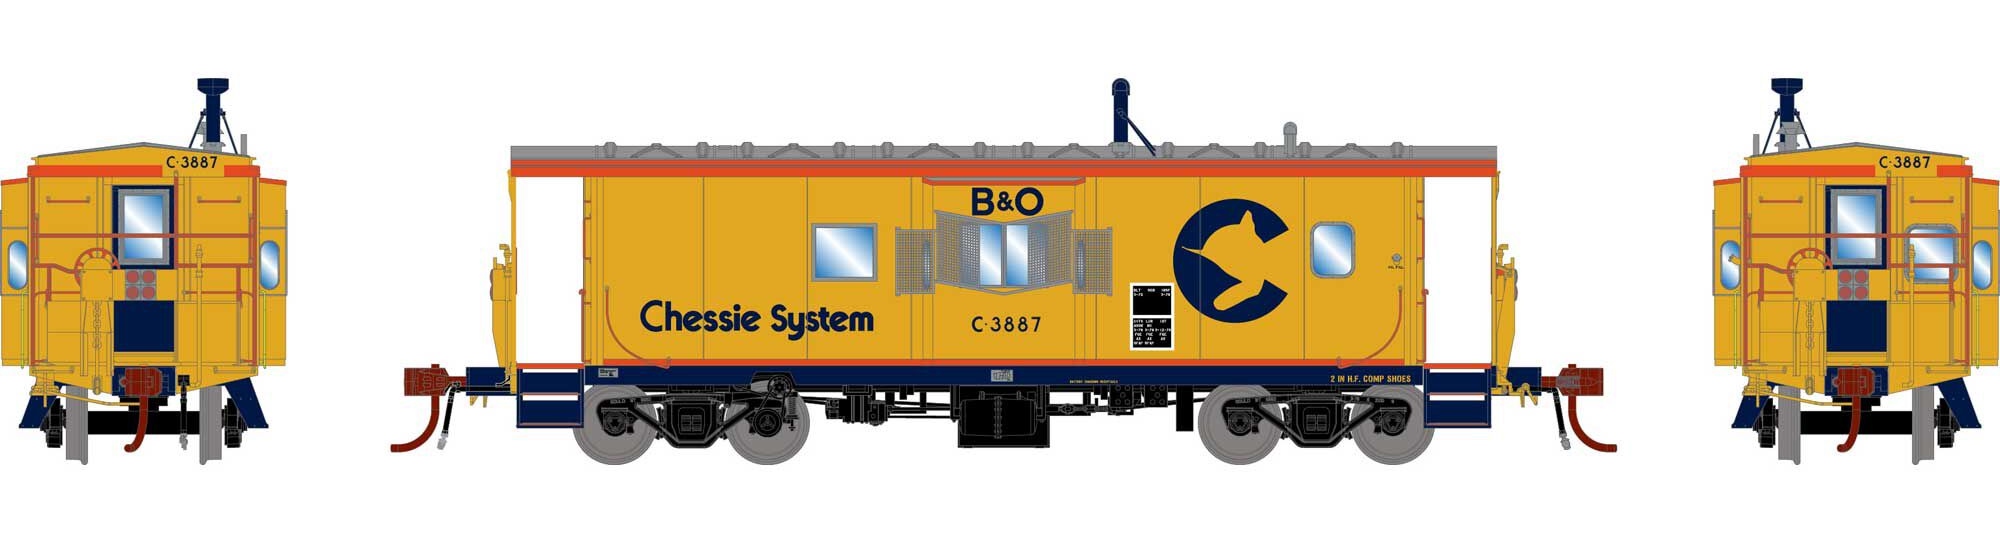 Athearn Genesis HO ATHG78348 DCC/Tsunami SoundCar Equipped C-26A ICC Caboose with Lights & Sound Chessie/B&O #C-3887